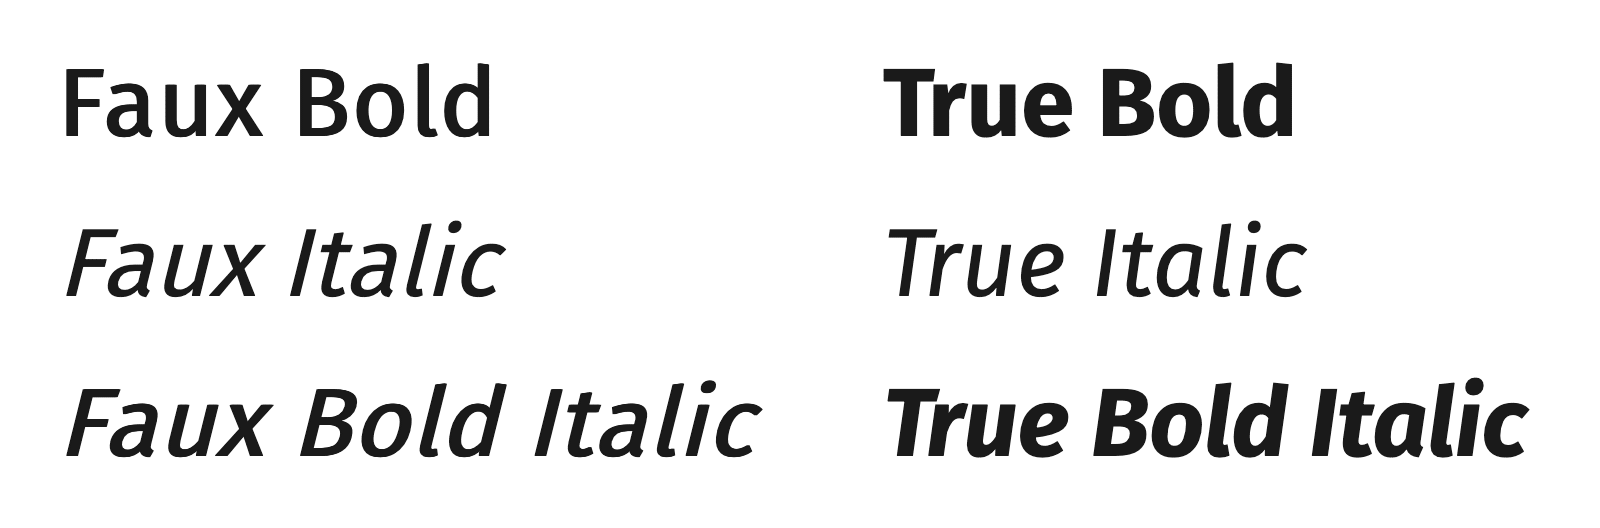 A comparison of text with a list of browser generated bold, italic, and bold italic styles on the left and the true font styles on the right.